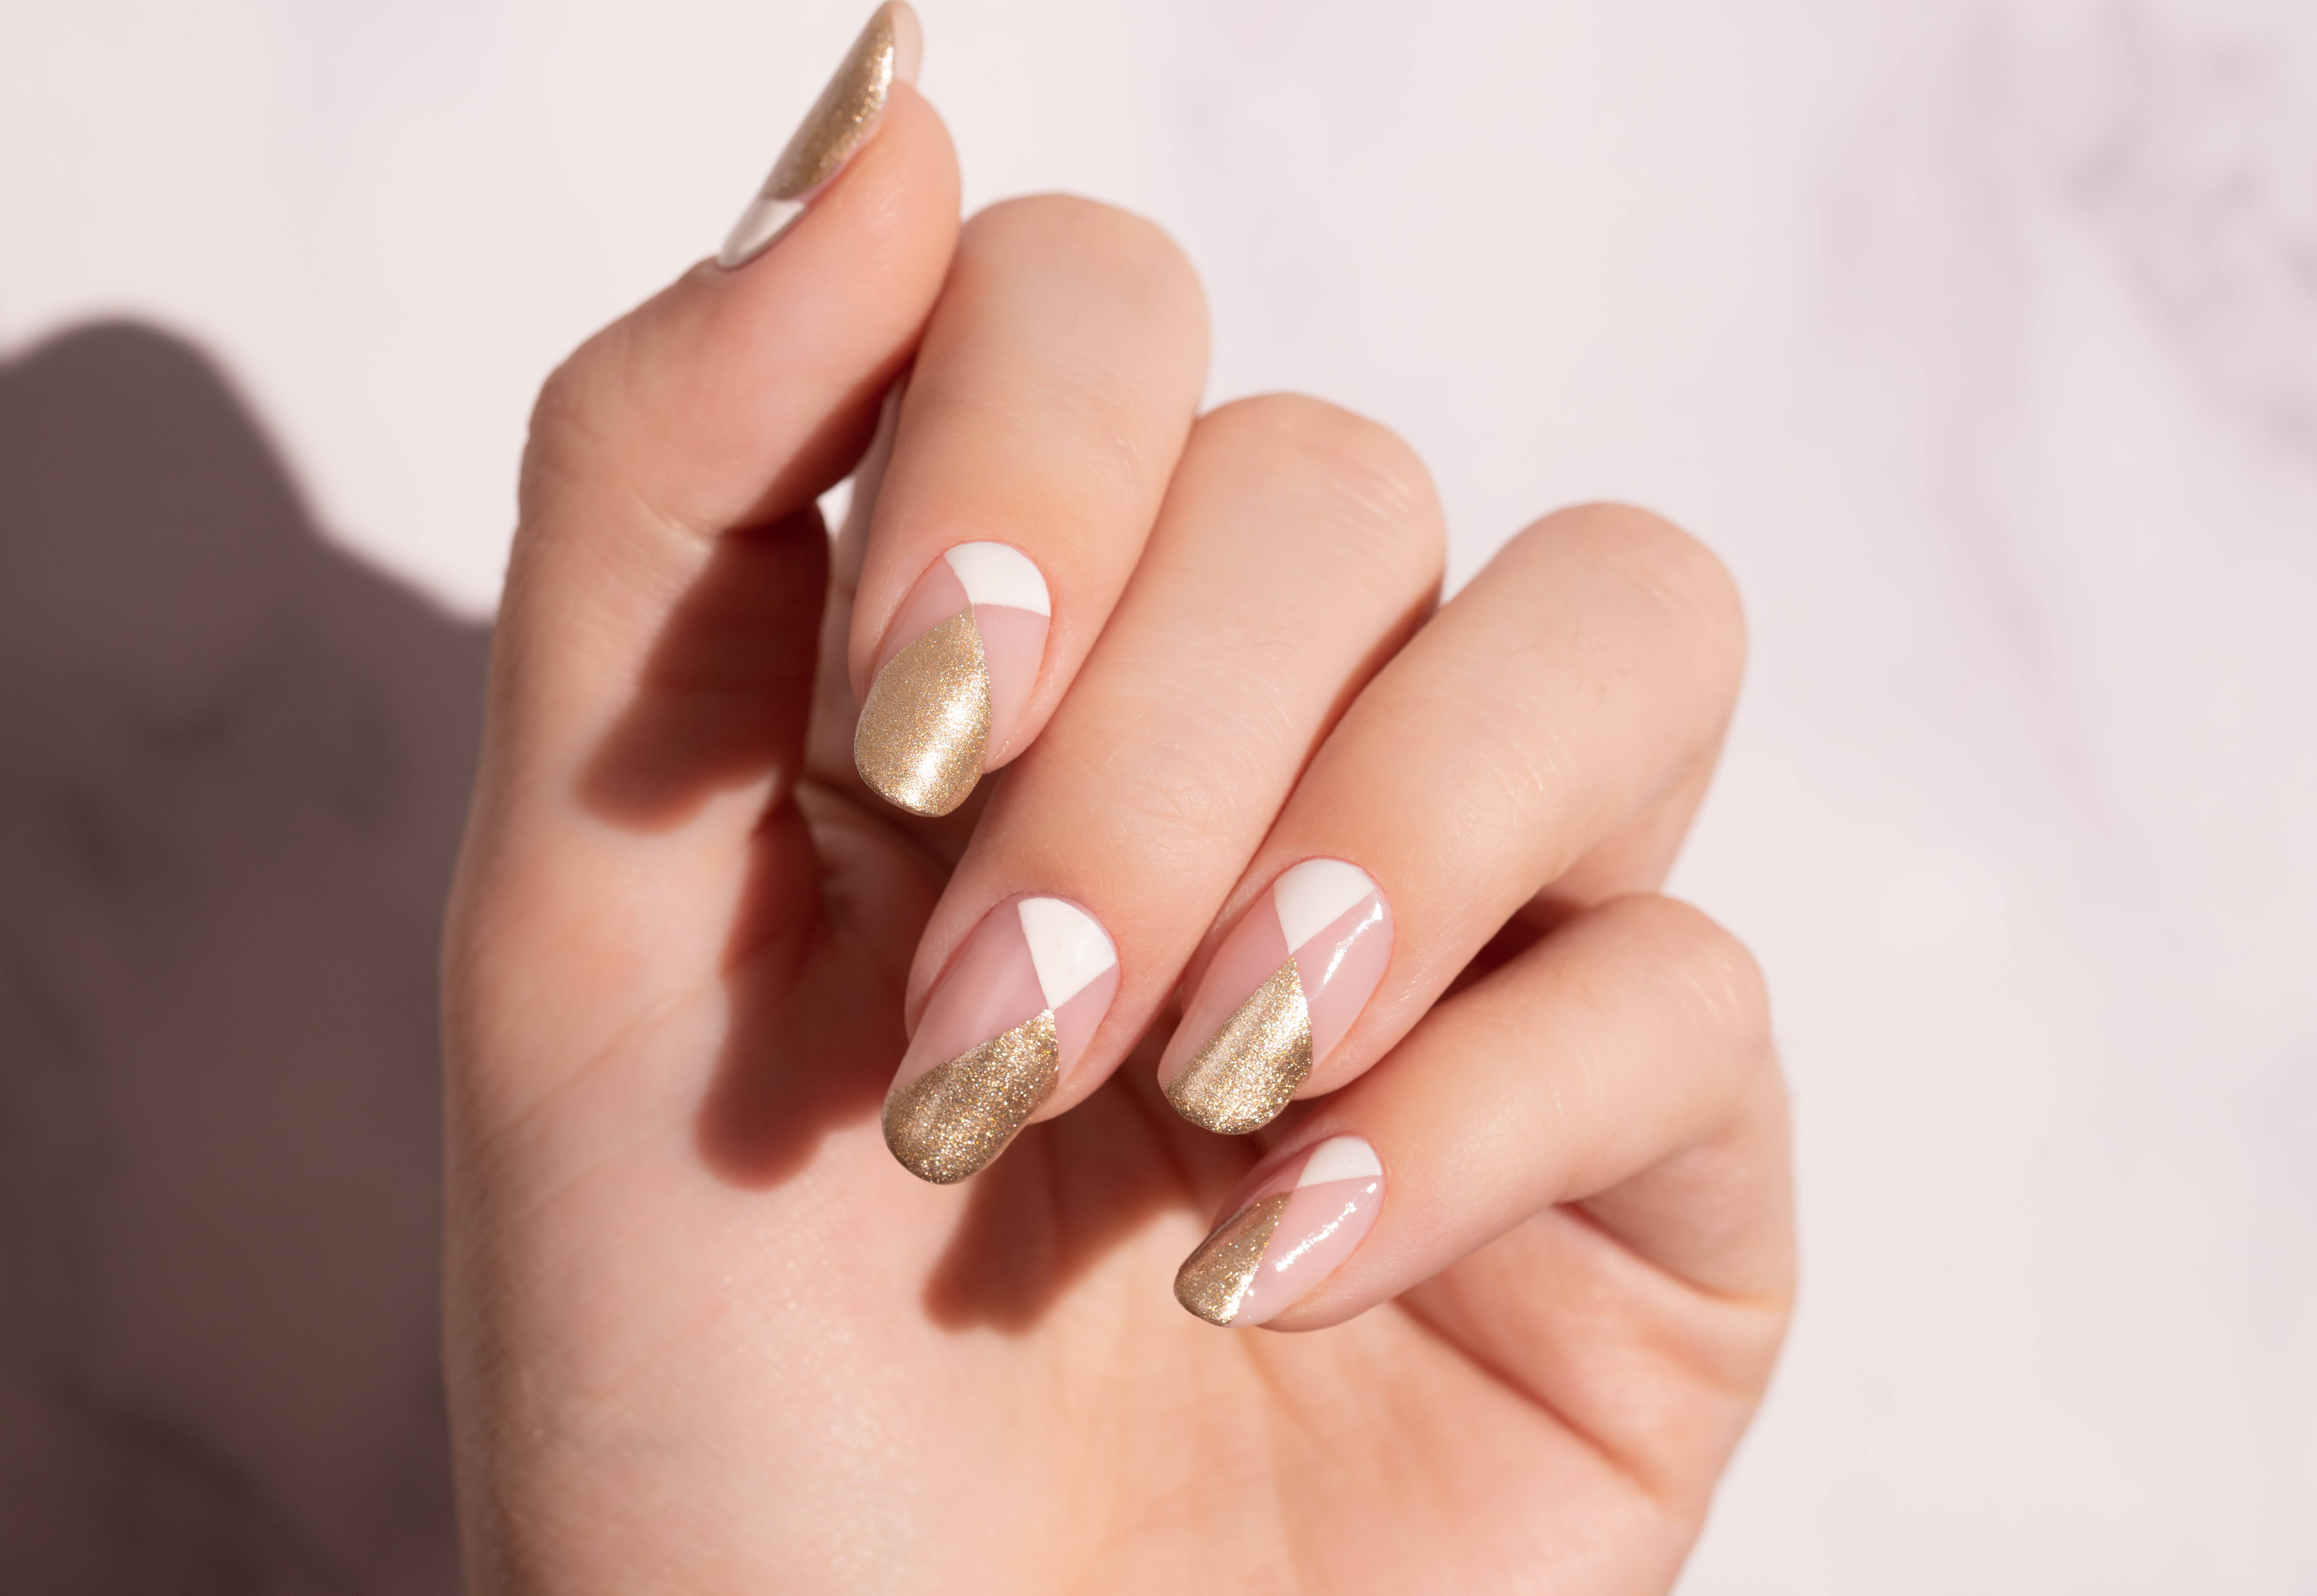 9. Chic Geometric Nail Art for Short Nails - wide 4